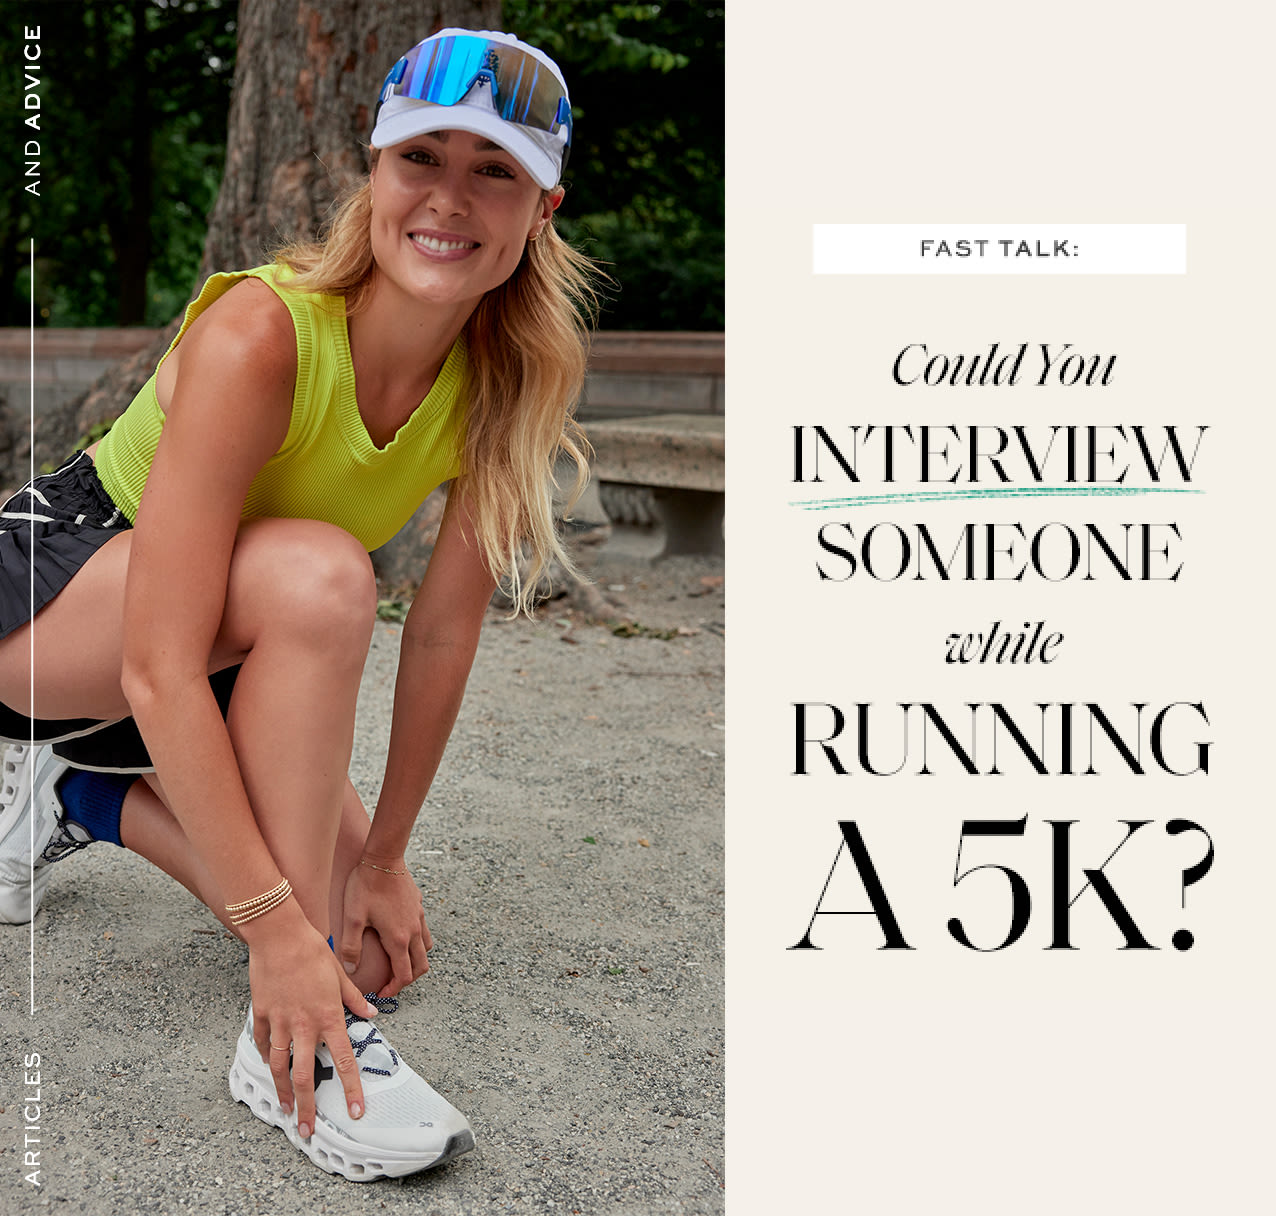 On The Run: Could You Interview Someone While Running A 5K?